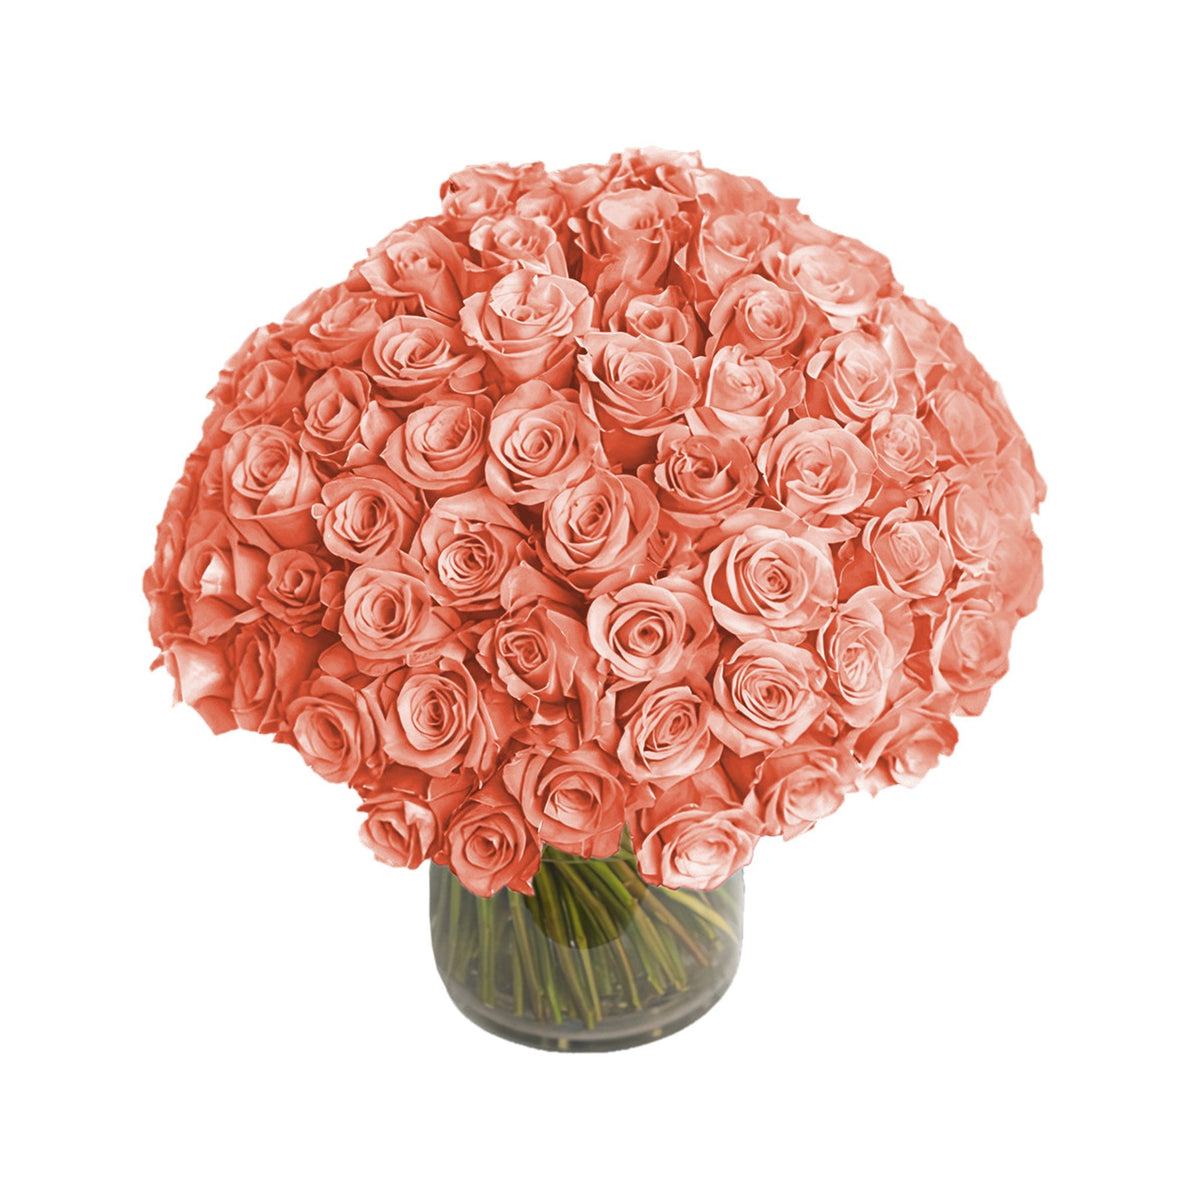 NYC Flower Delivery - Fresh Roses in a Vase | 100 Peach Roses - Roses